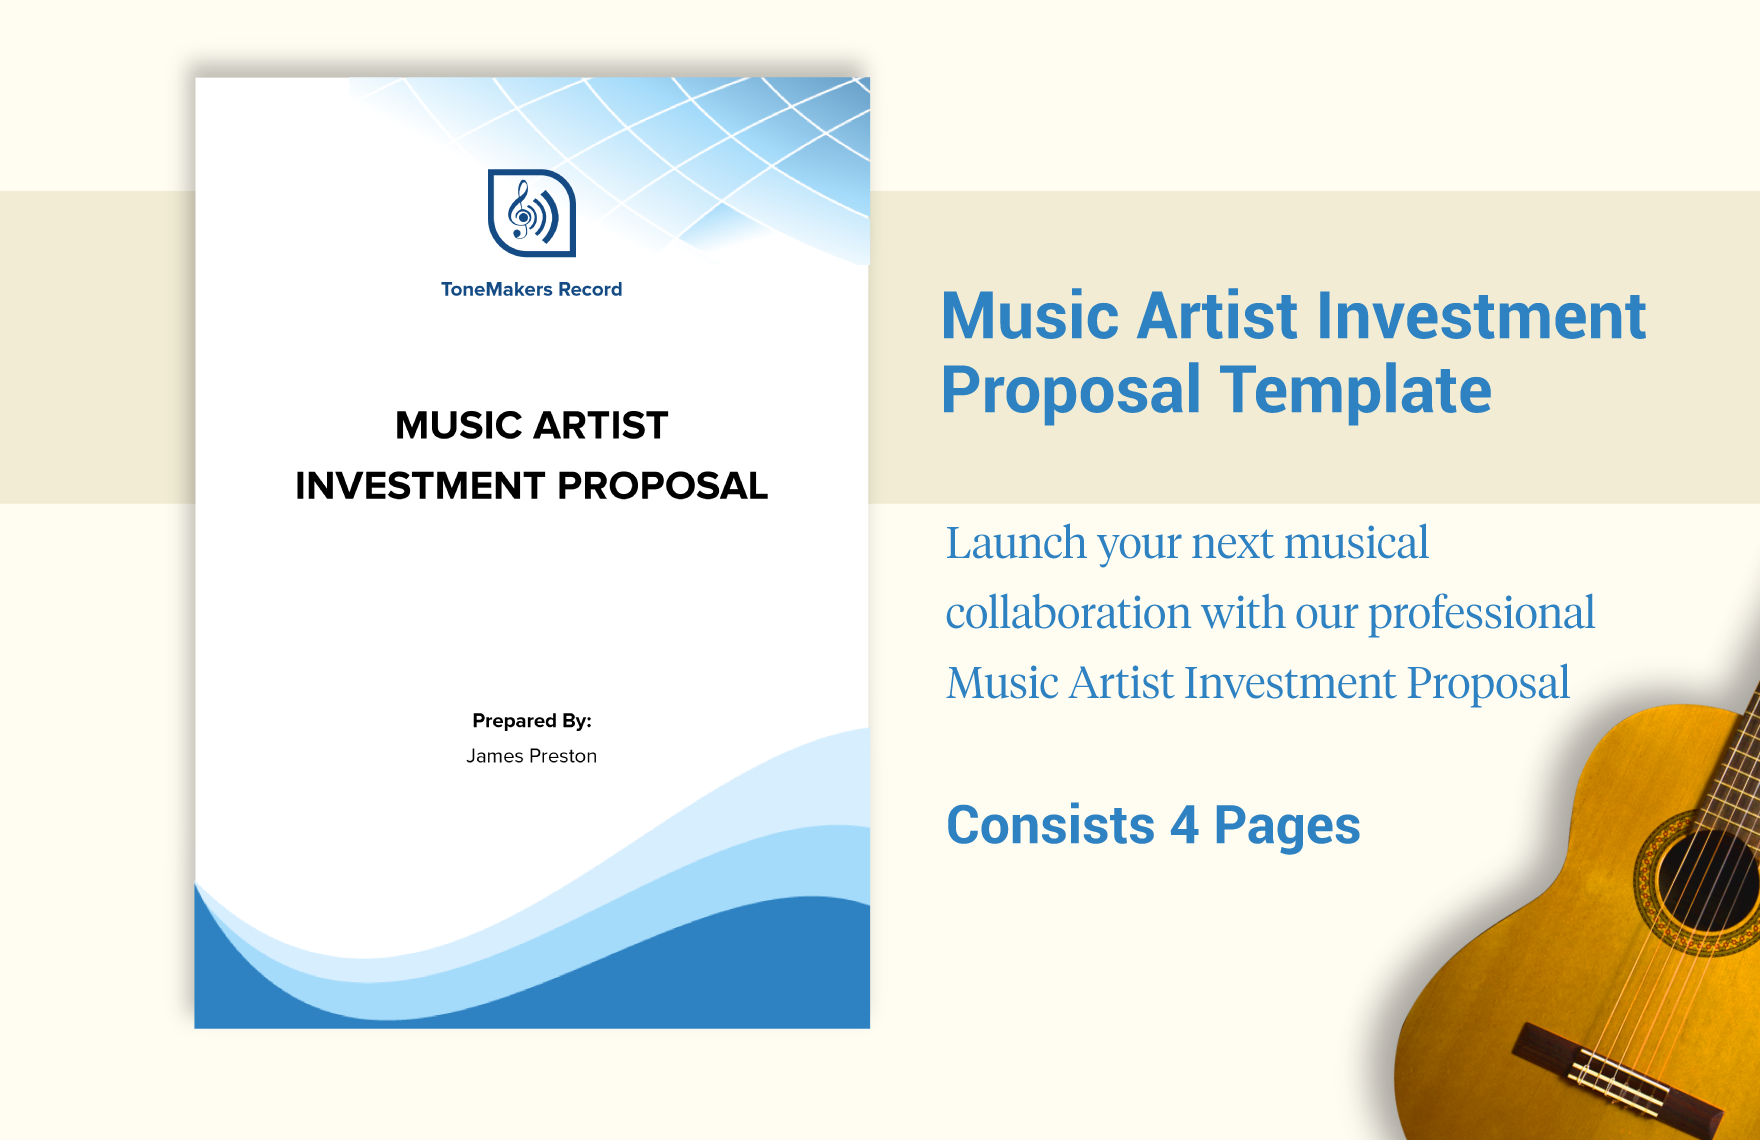 Music Proposal Template in PDF